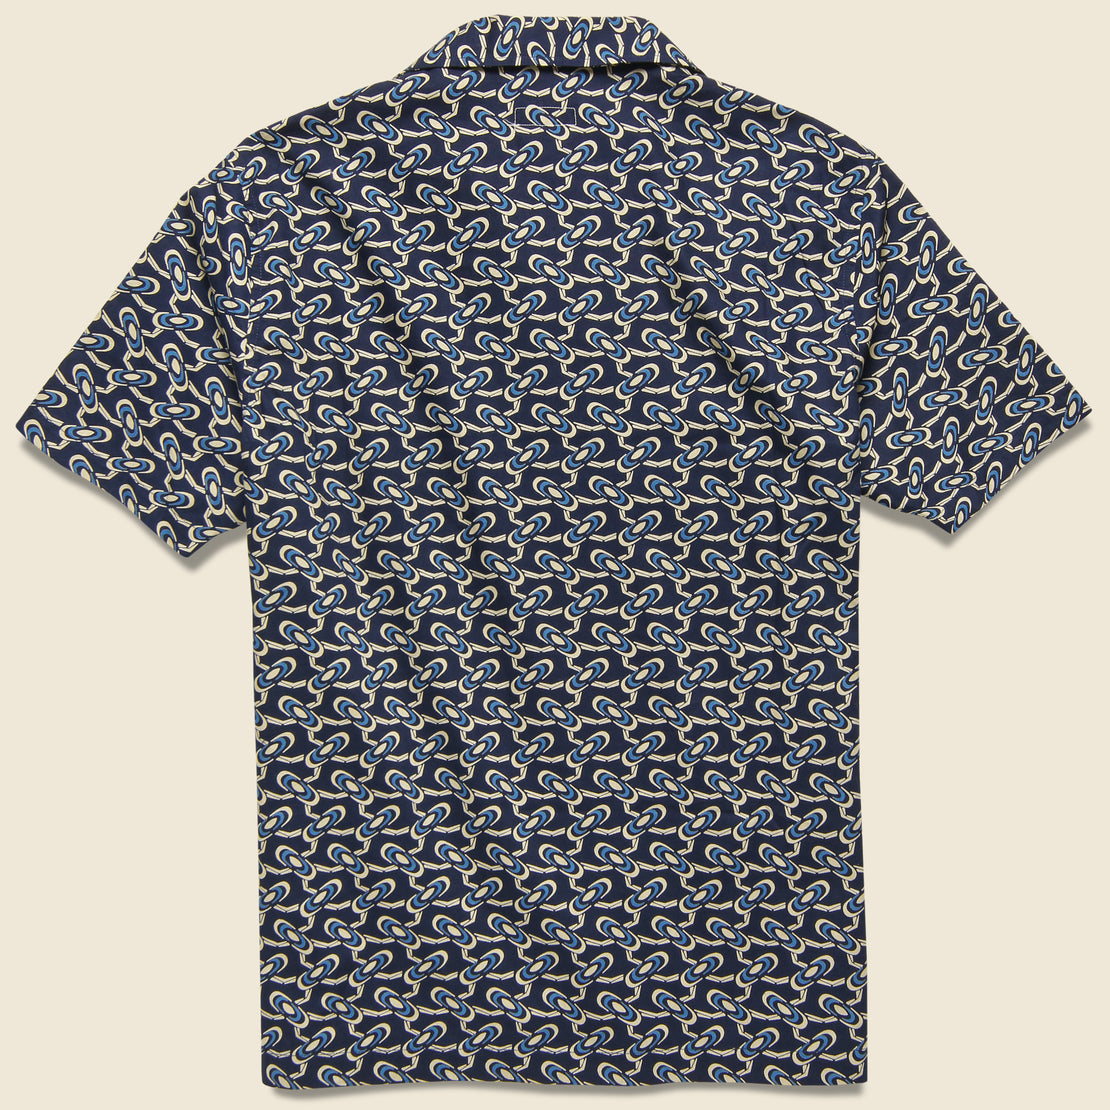 Comma Camp Shirt - Tripper Navy - Knickerbocker - STAG Provisions - Tops - S/S Woven - Other Pattern